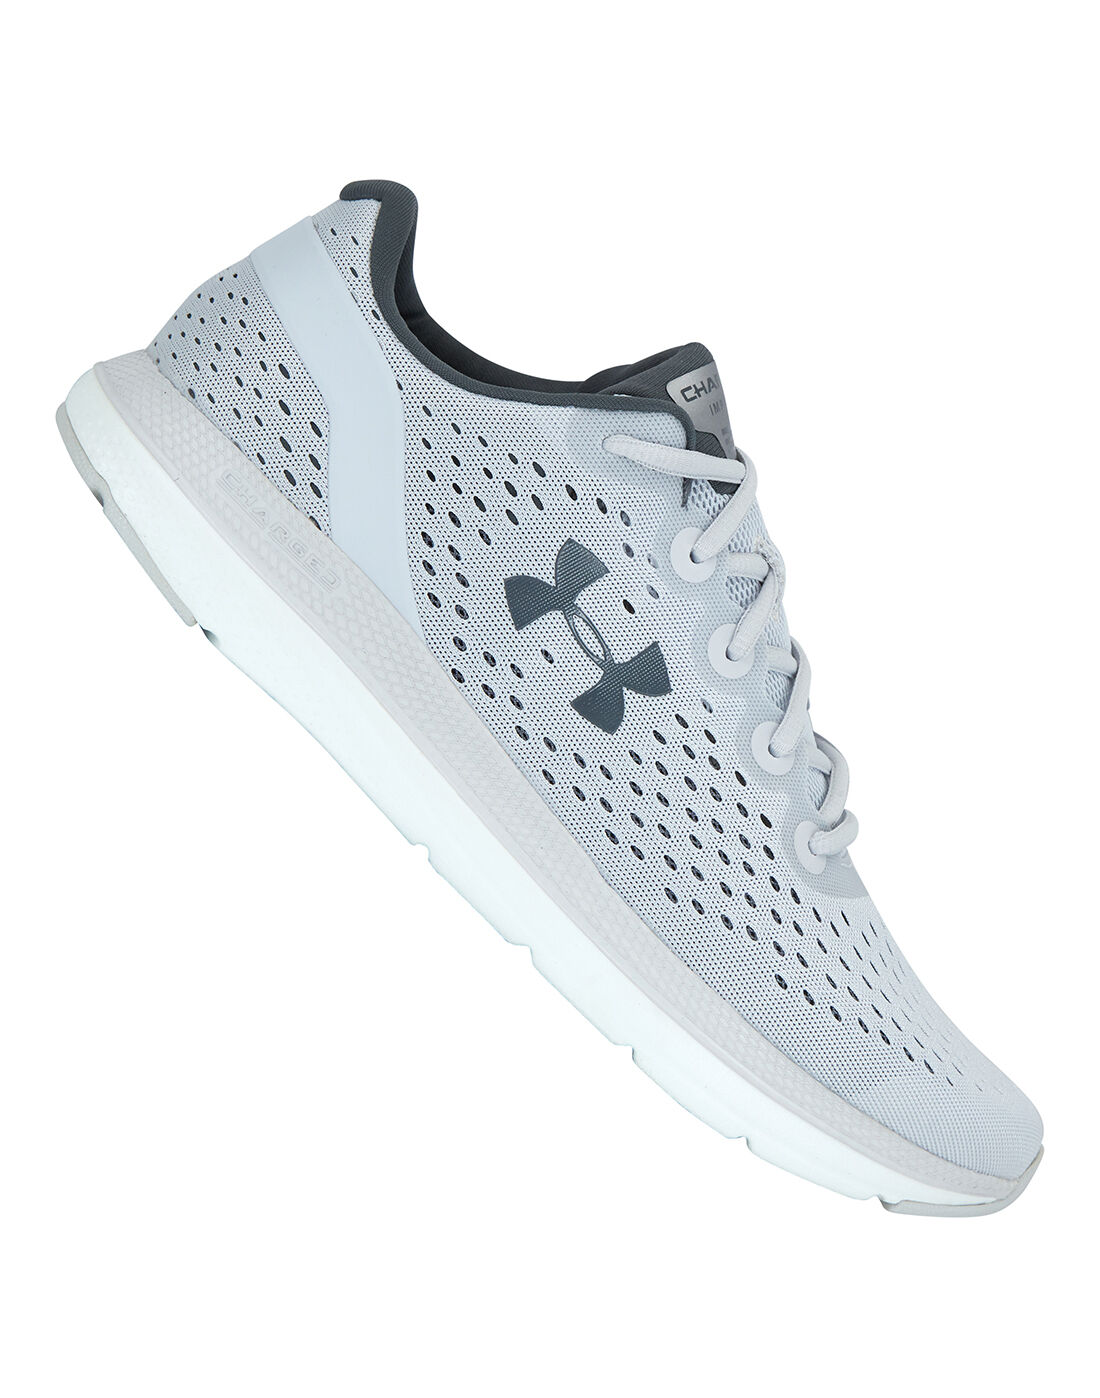 Under Armour Mens Charged Impulse - Grey | Life Style Sports EU